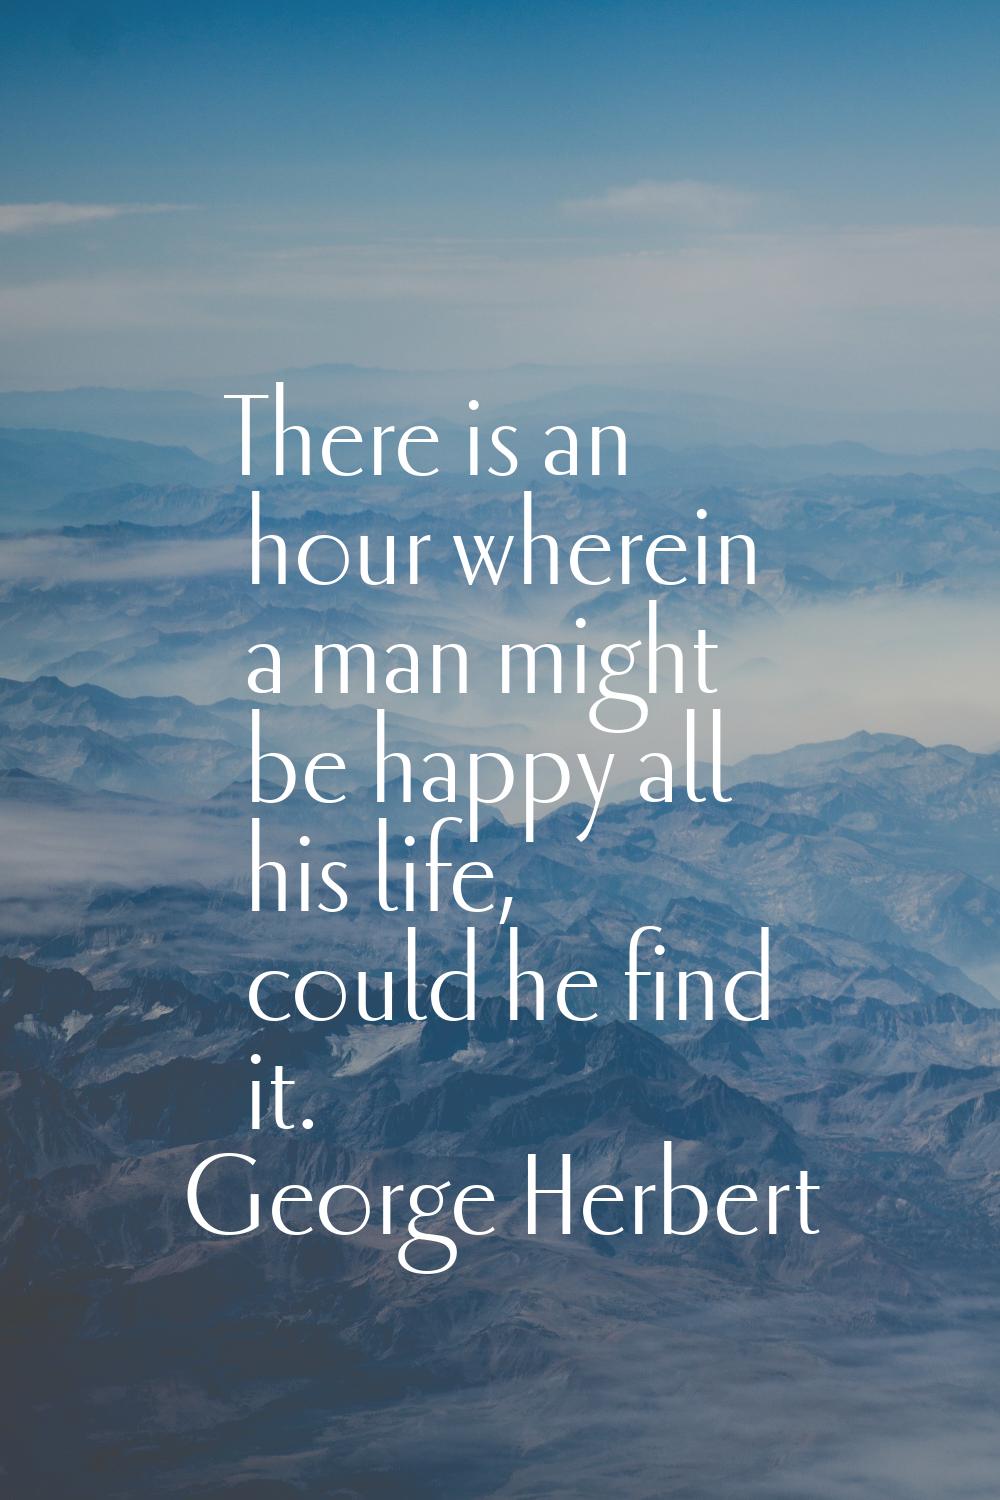 There is an hour wherein a man might be happy all his life, could he find it.